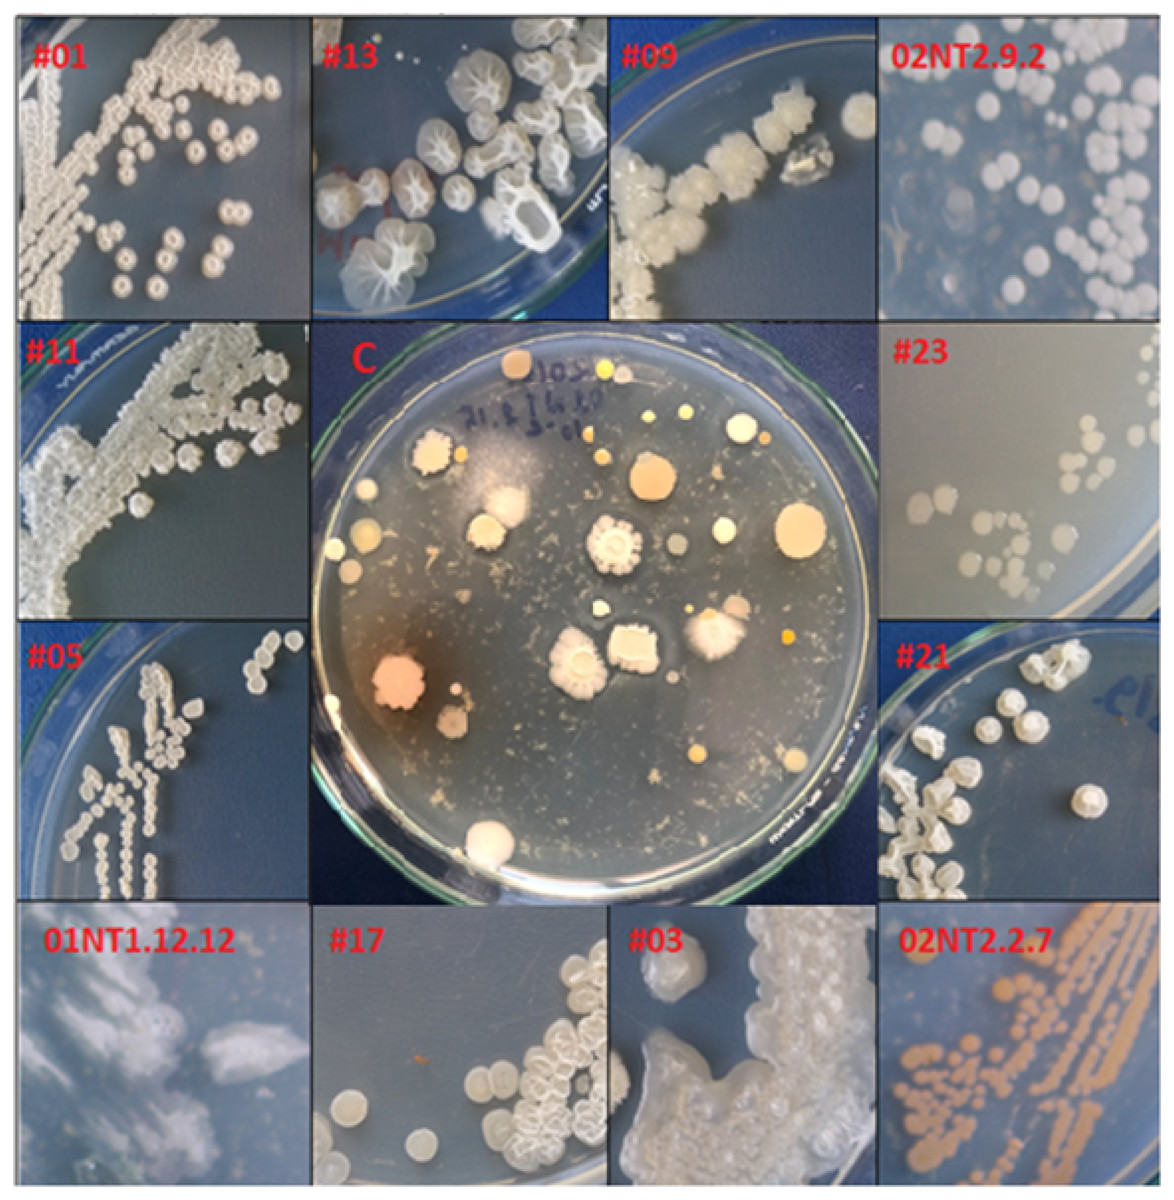 spore forming bacteria examples